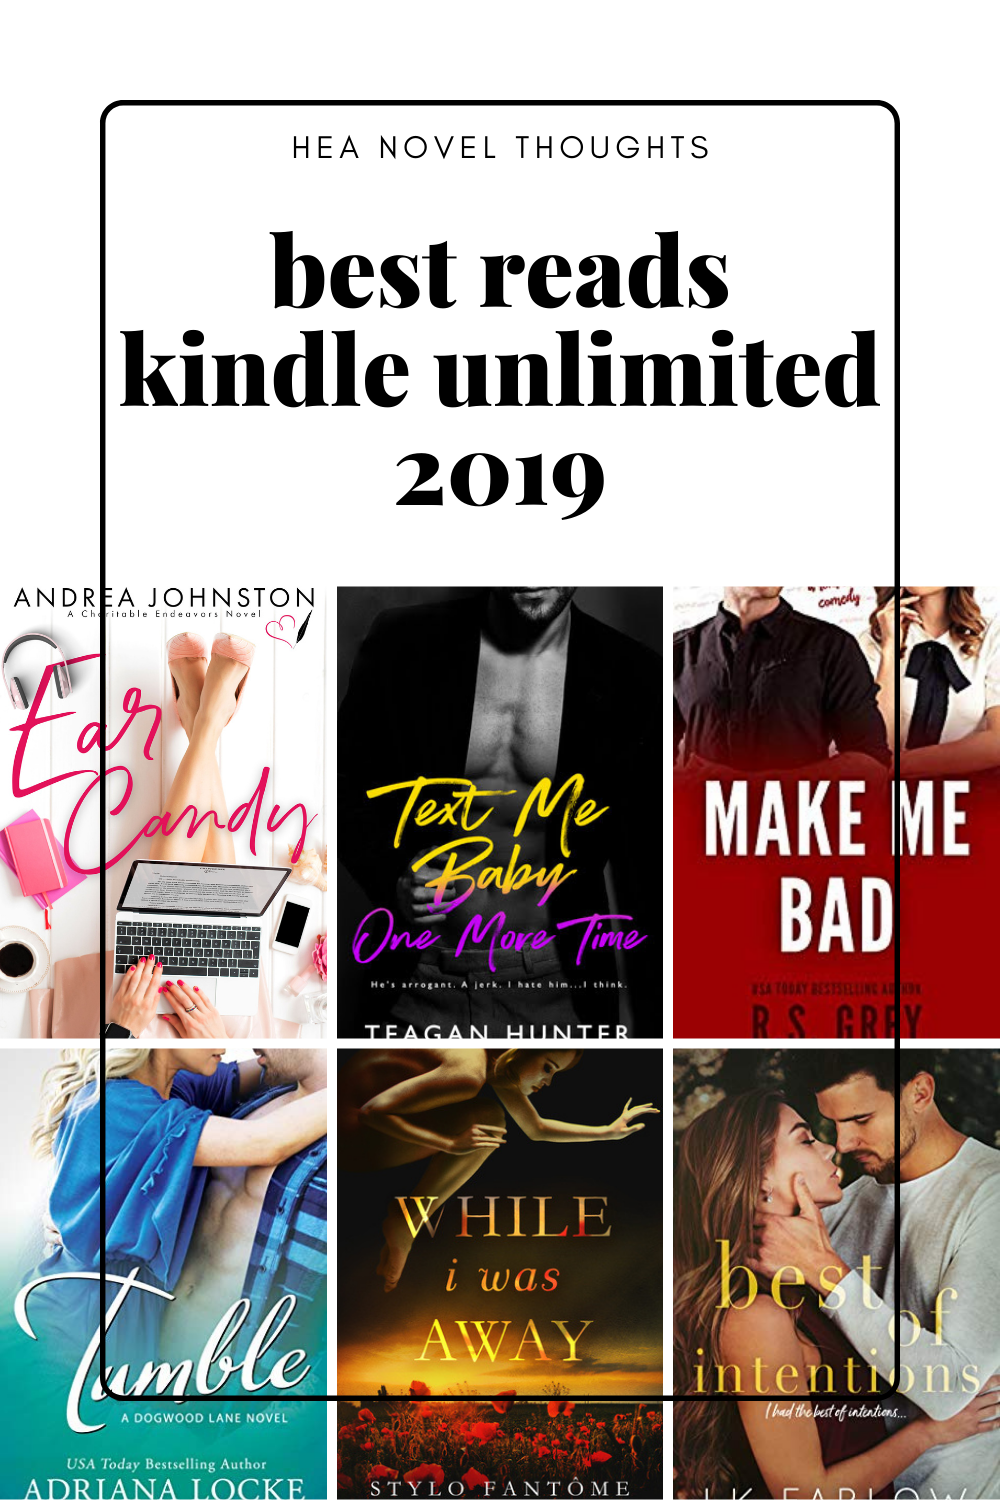 The Best Kindle Unlimited Romance Books of 2019 - HEA Novel Thoughts